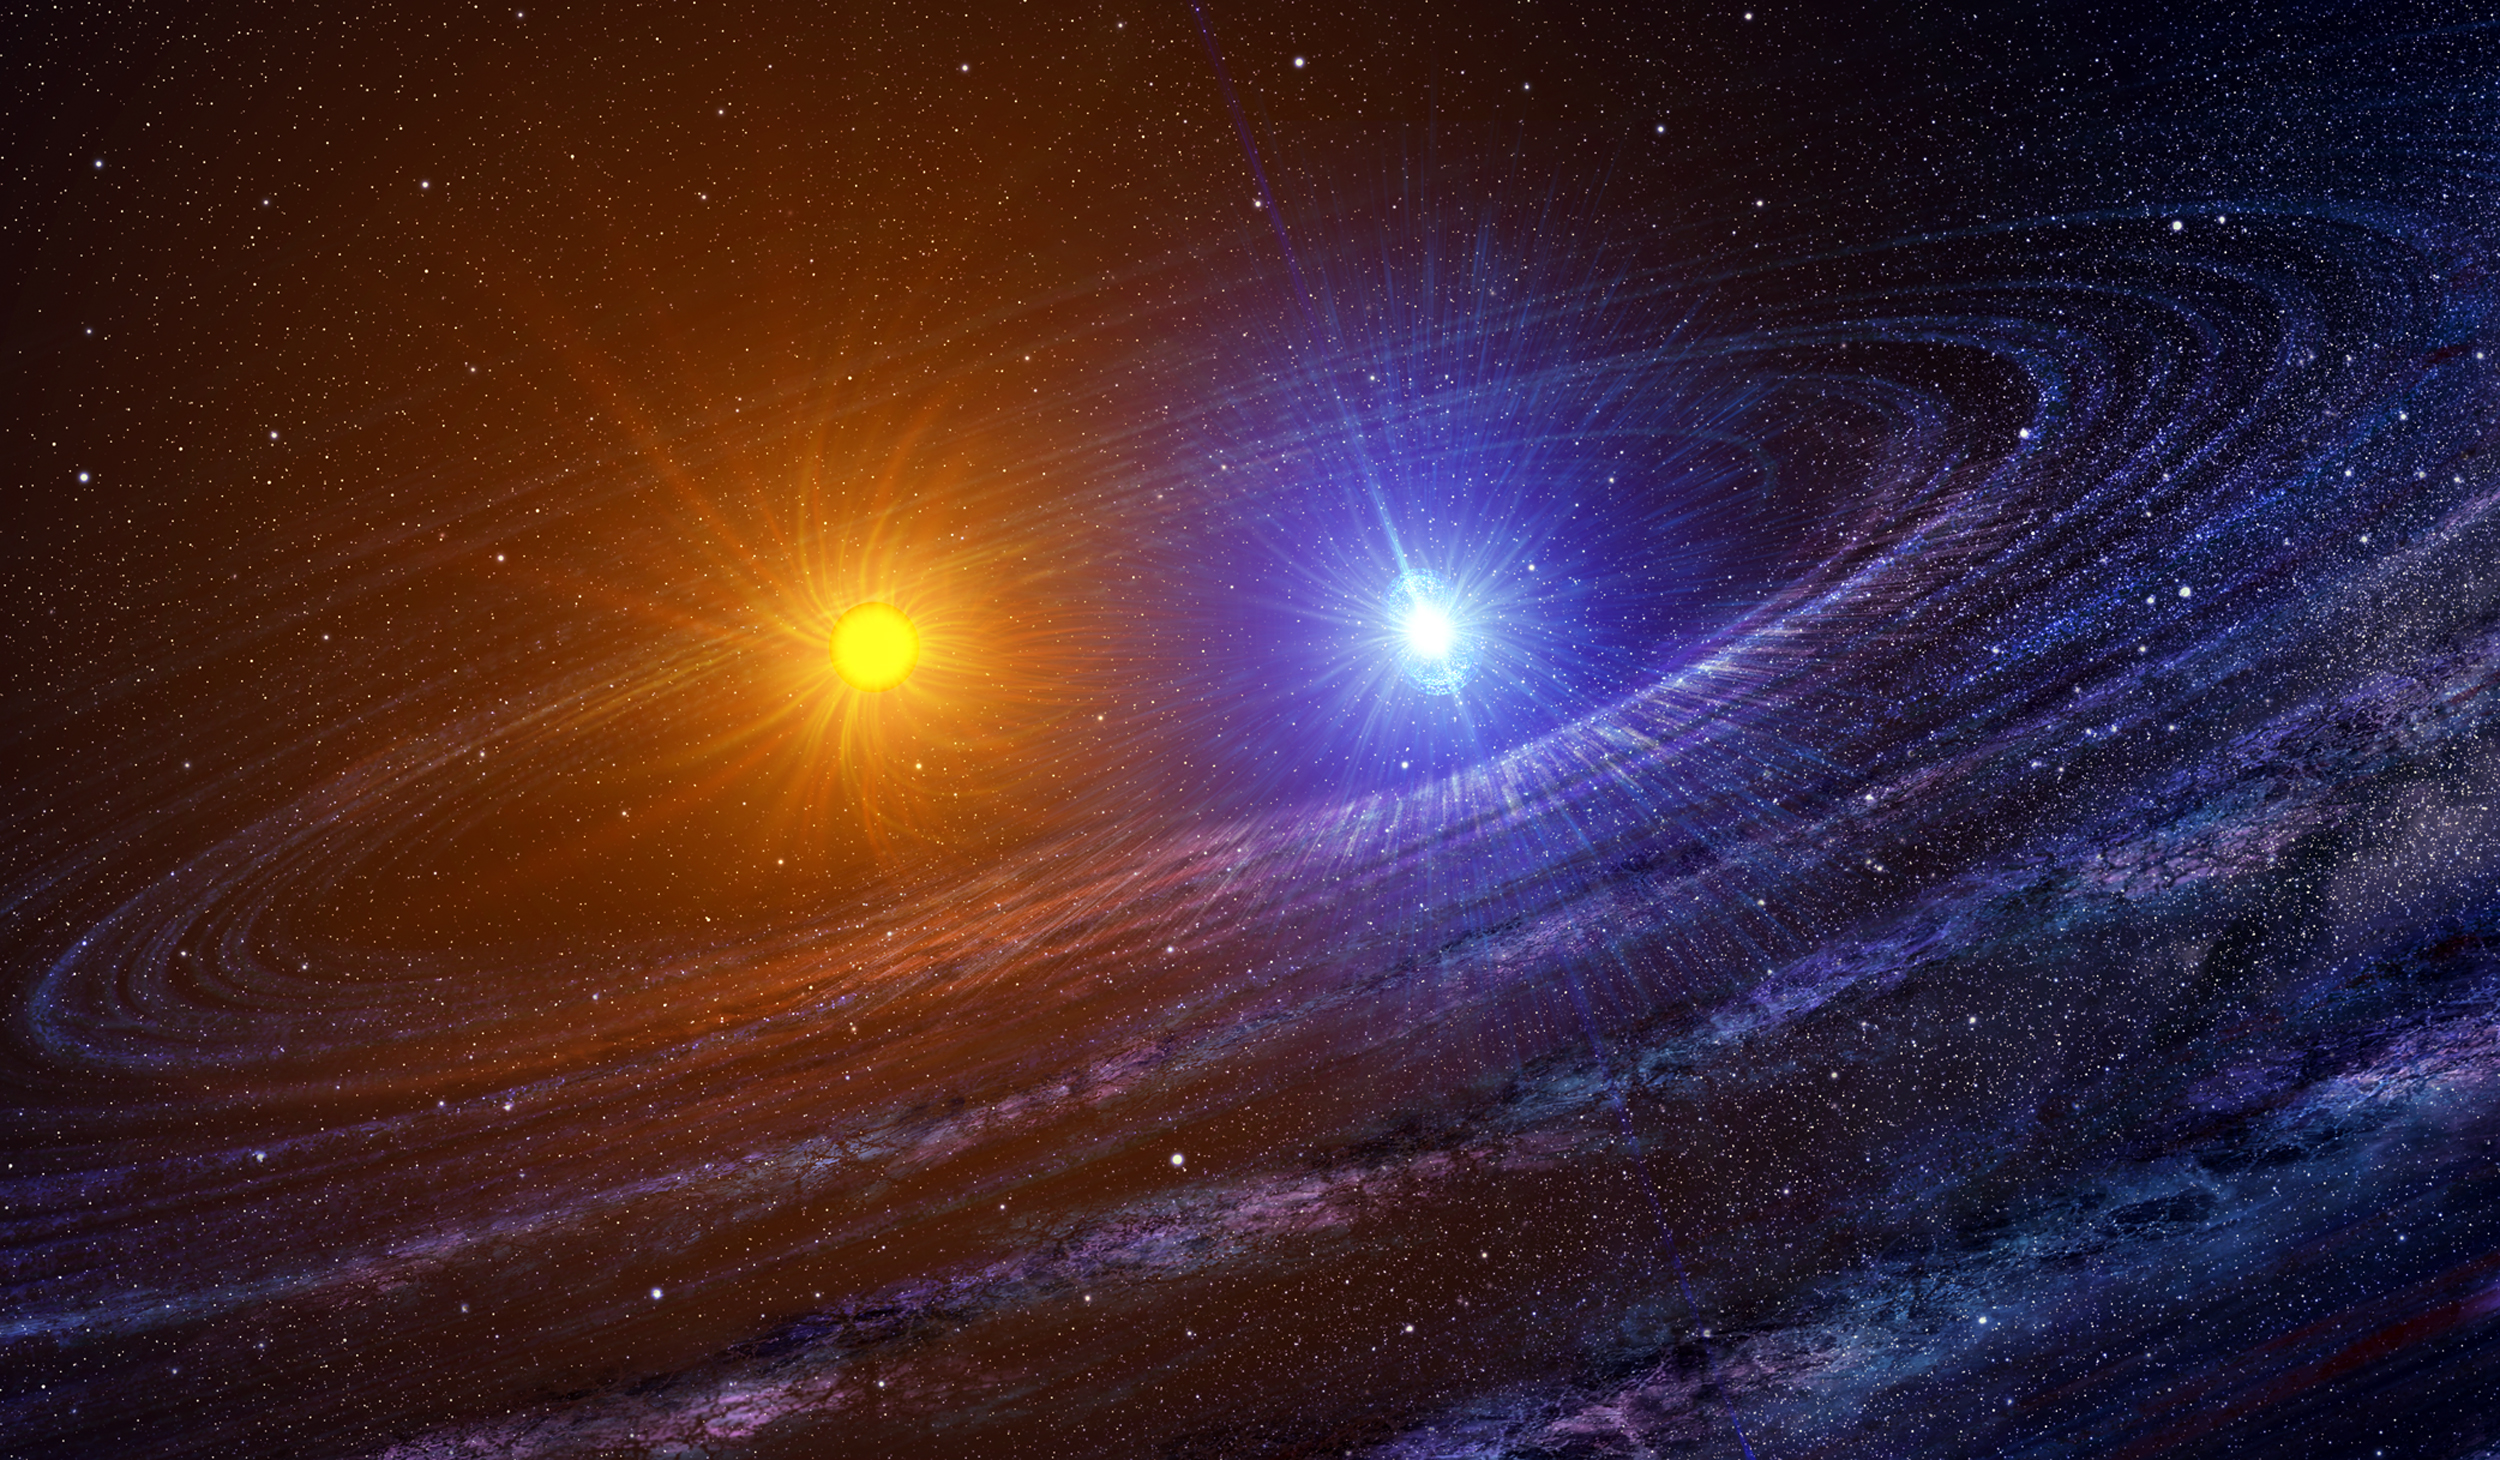 Artist's impression of a young binary system. Scientists believe that our Sun might have a twin star. Credit: NASA